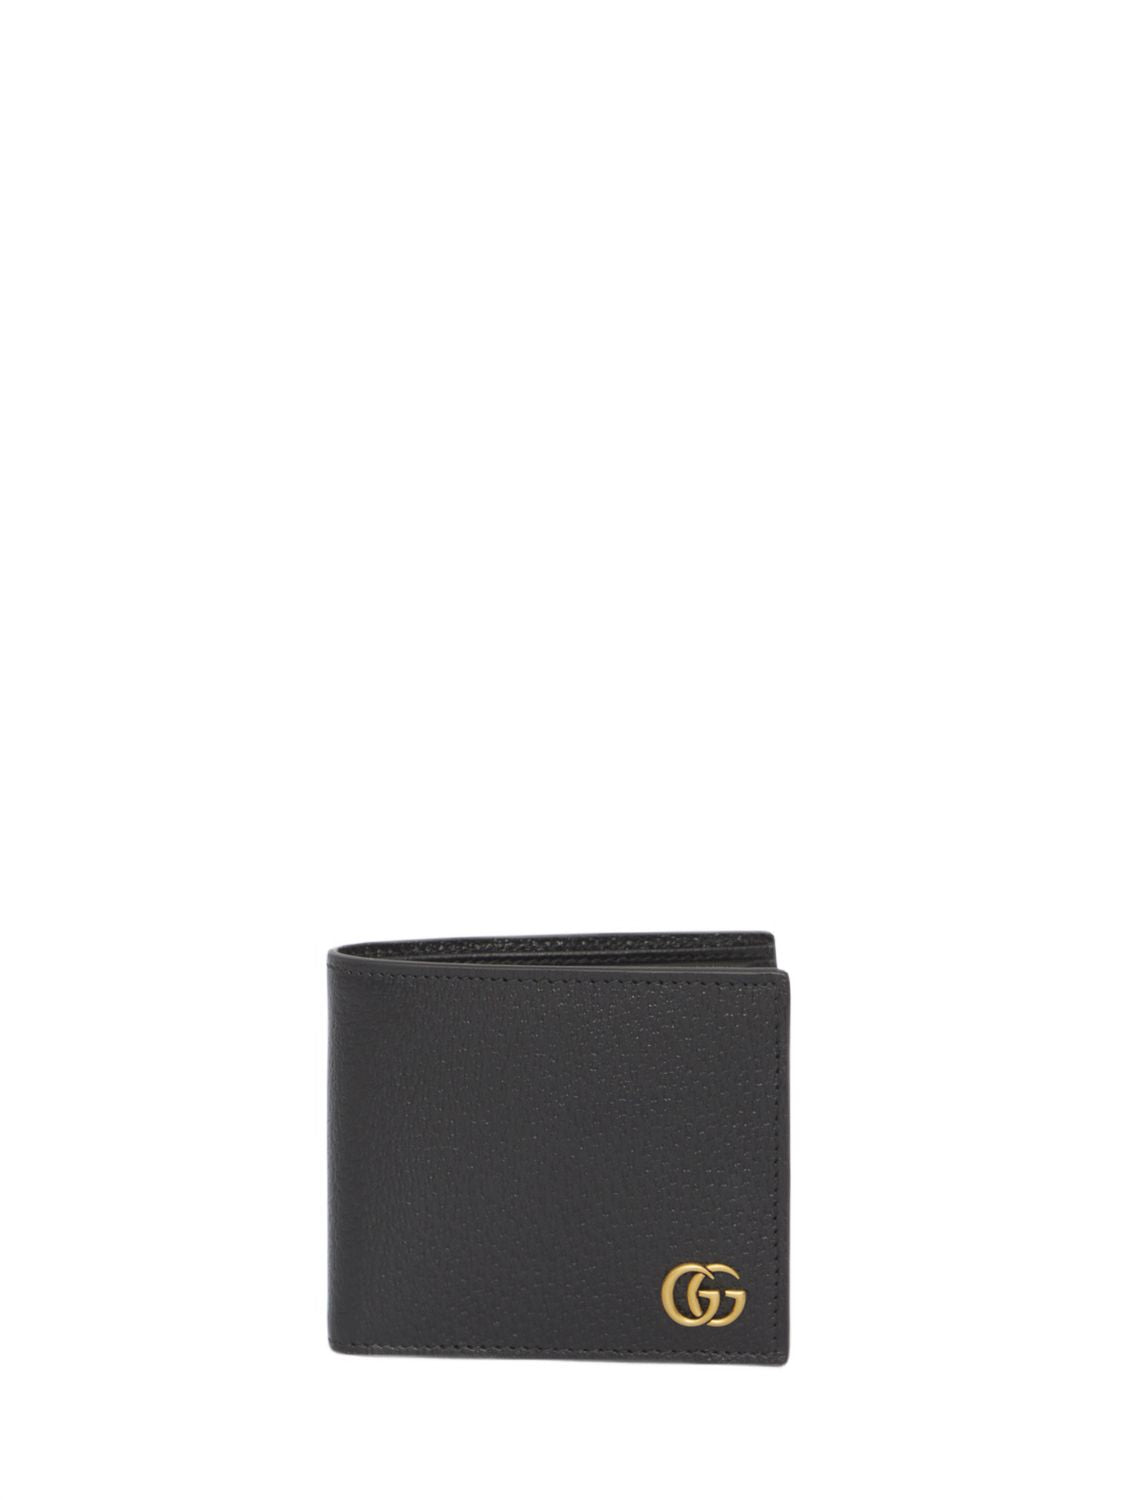 GUCCI Classic Leather Flap Wallet for Men